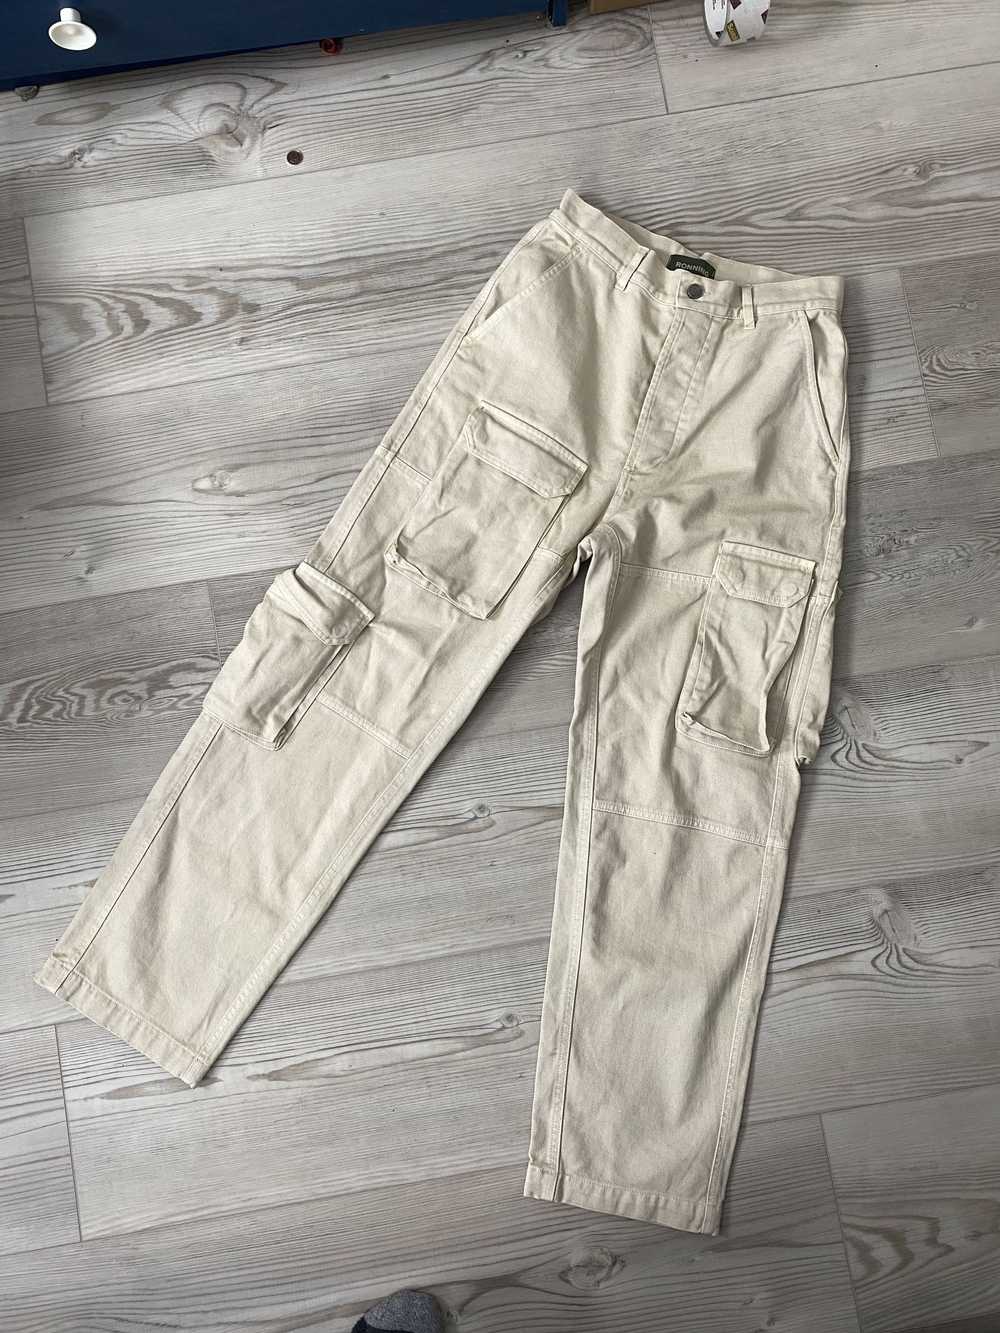 Ronning Ronning Everday Cargo Pants - image 1